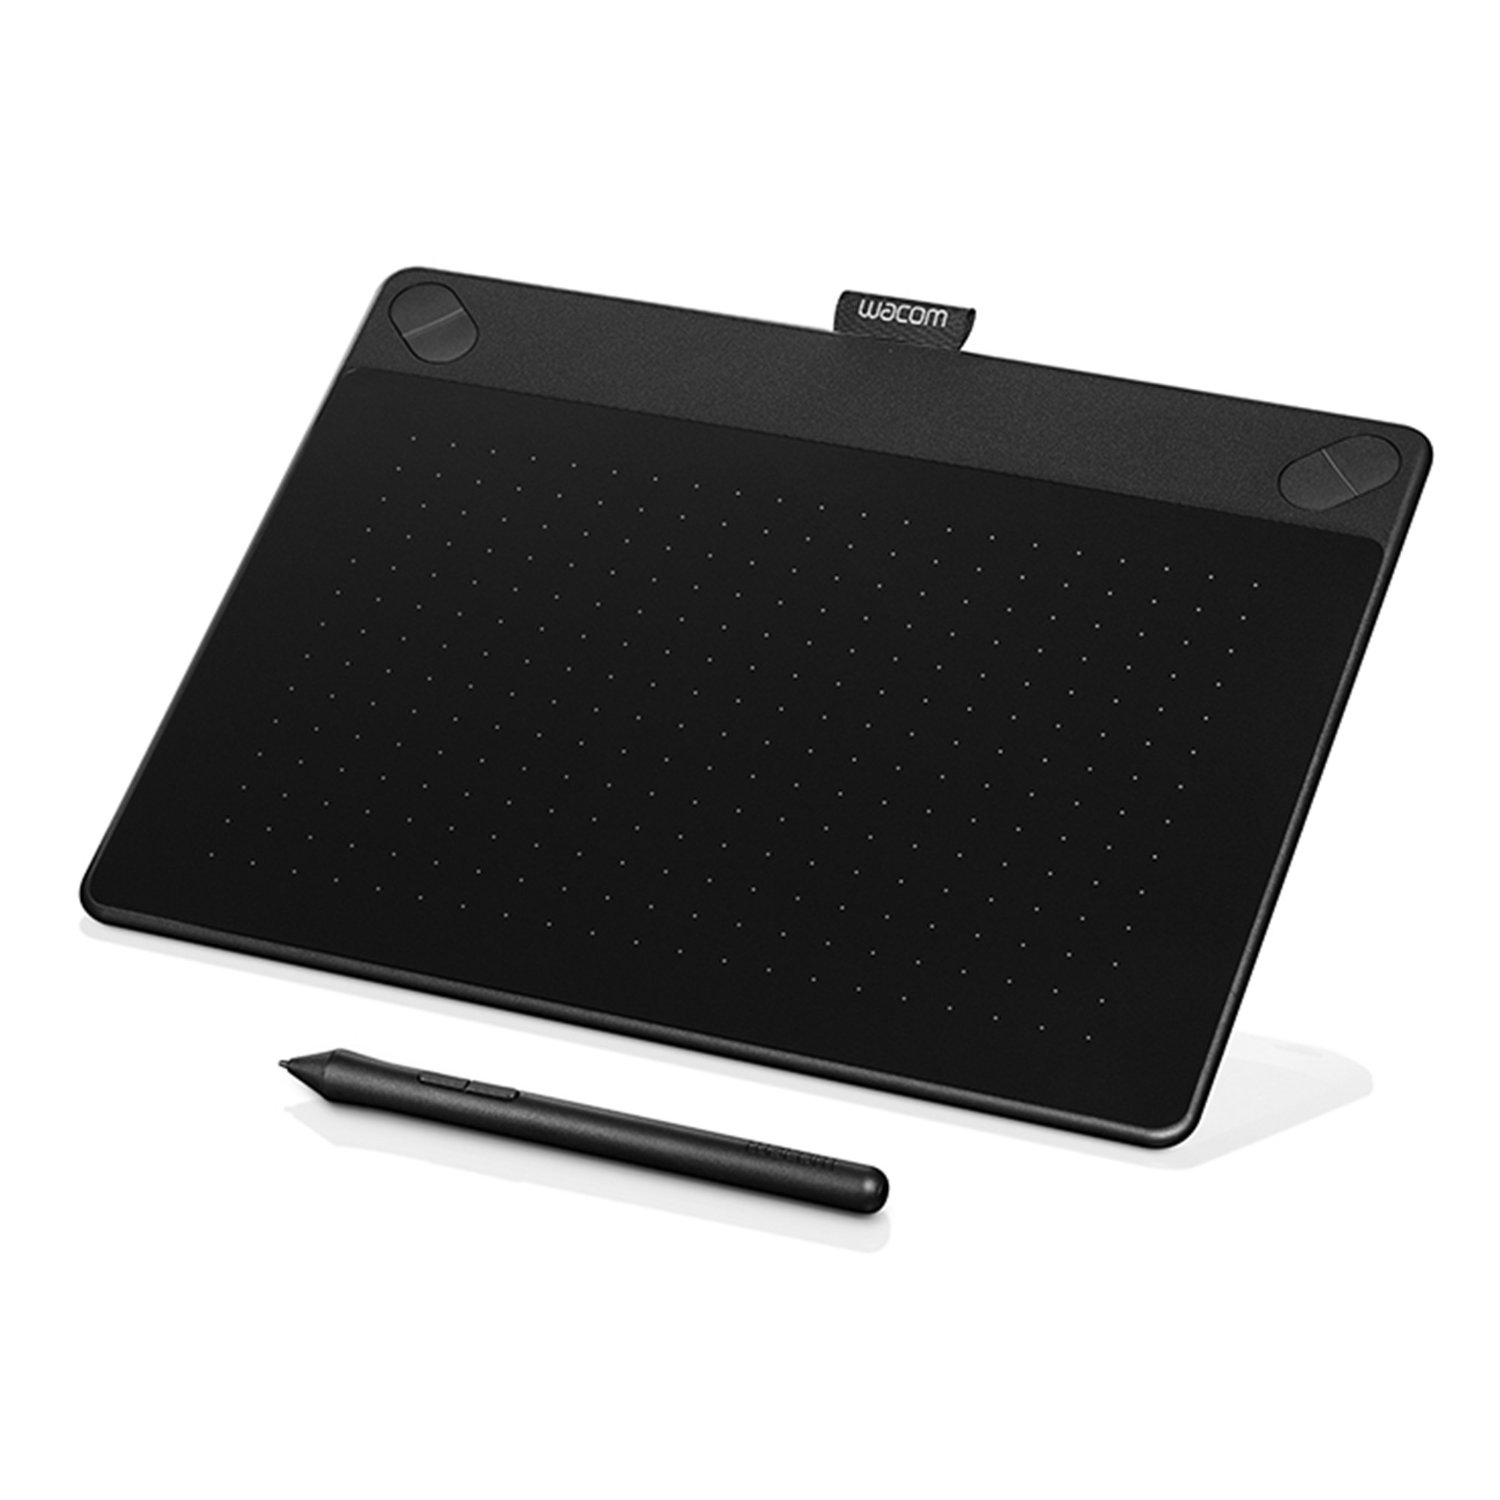 Intuos tablet driver v 6.3 8 mac update